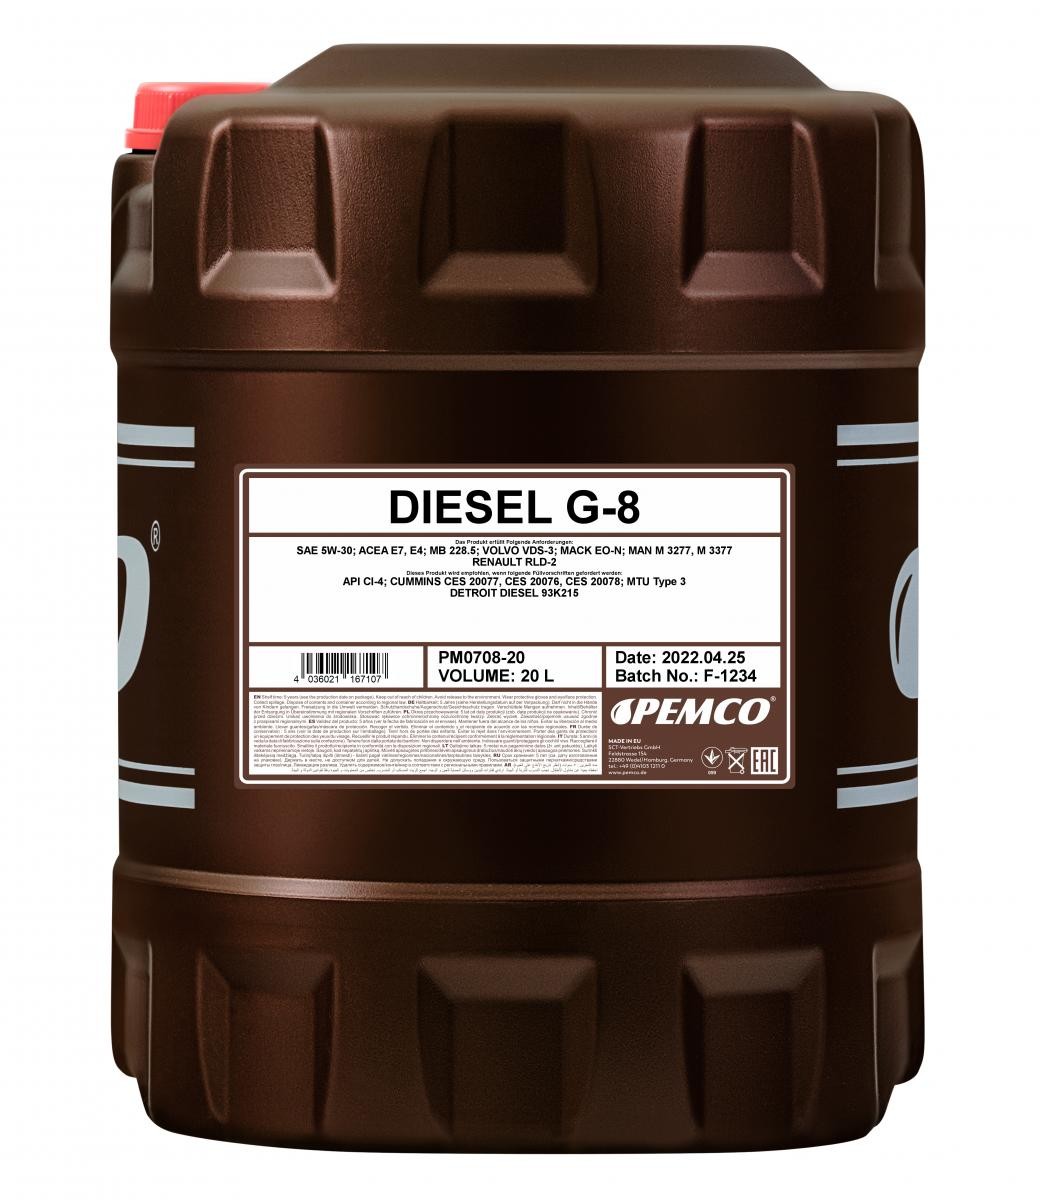 Automobile oil MB 228.5 PEMCO - PM0708-20 Truck UHPD, DIESEL G-8